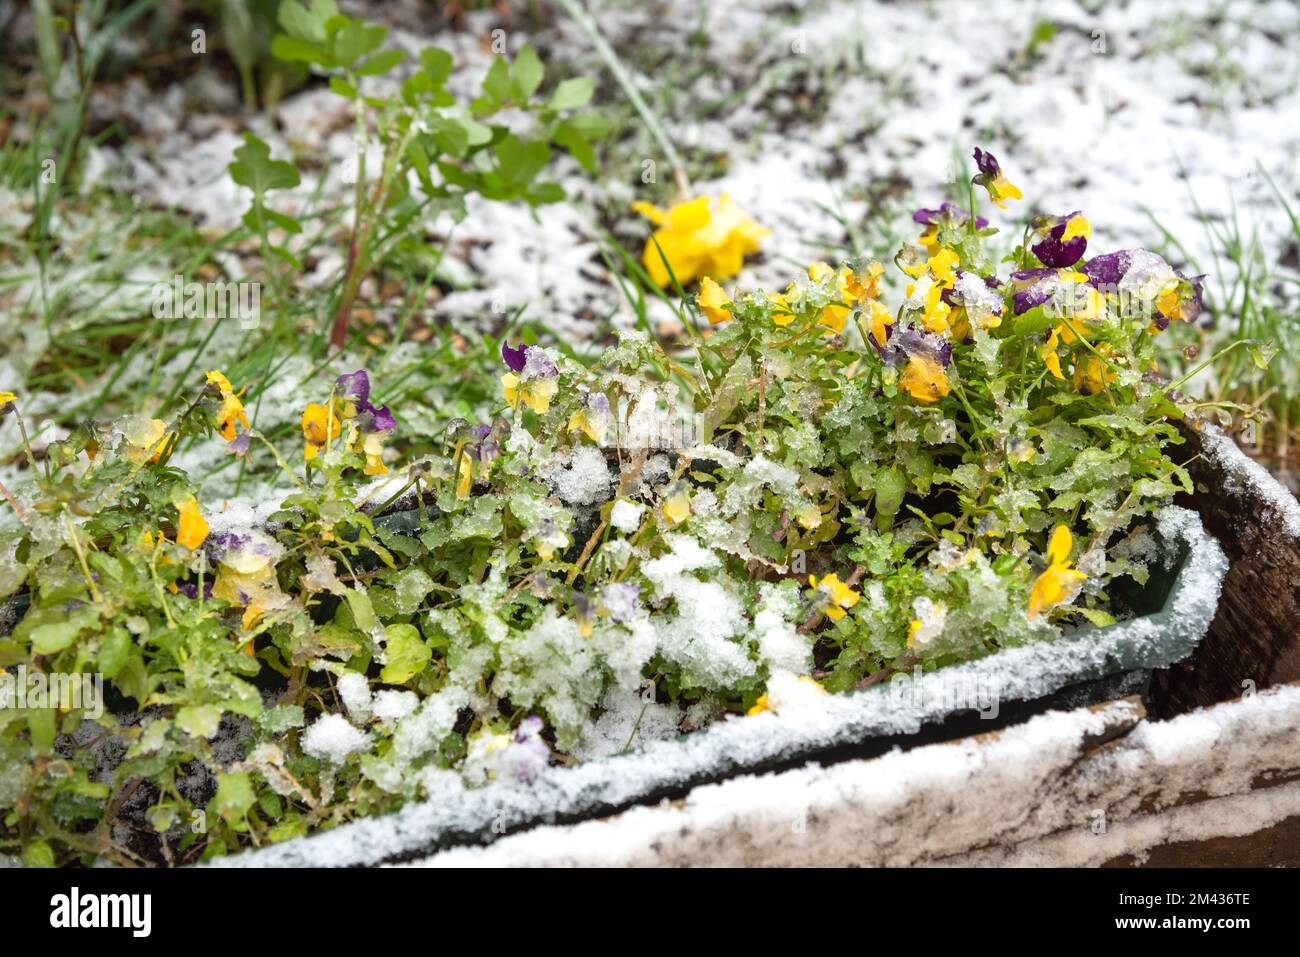 Surprised pansy flowers at flower box covered with snow. Sudden winter in spring. Global climate change. Gardening challenge difficulties. Stock Photo